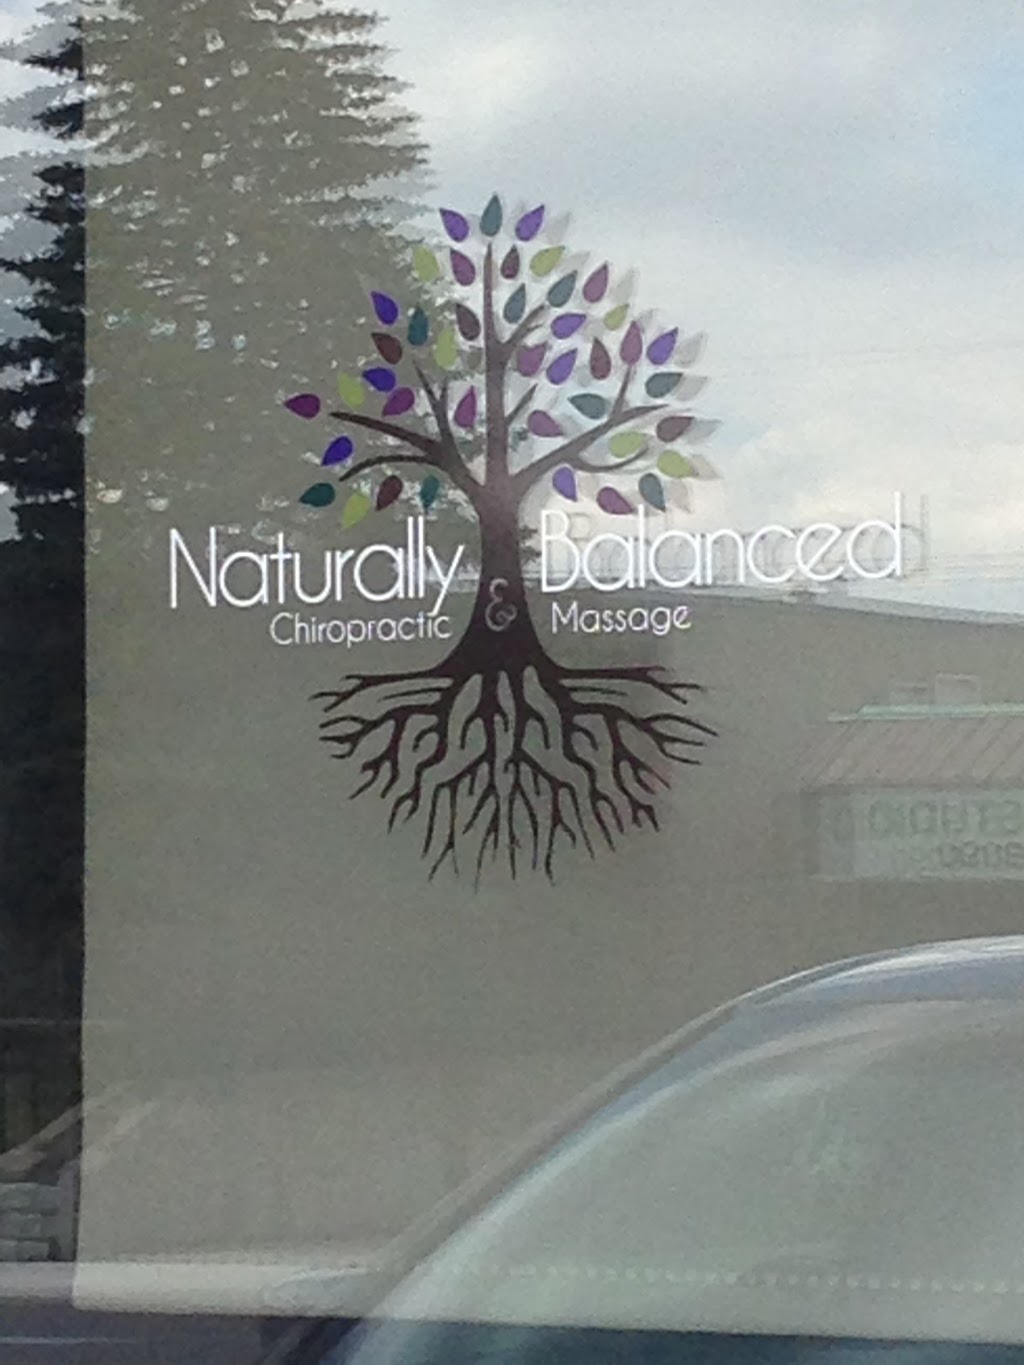 Naturally Balanced Chiropractic & Massage | 4813 Centre St N, Calgary, AB T2E 2Z6, Canada | Phone: (403) 277-2330